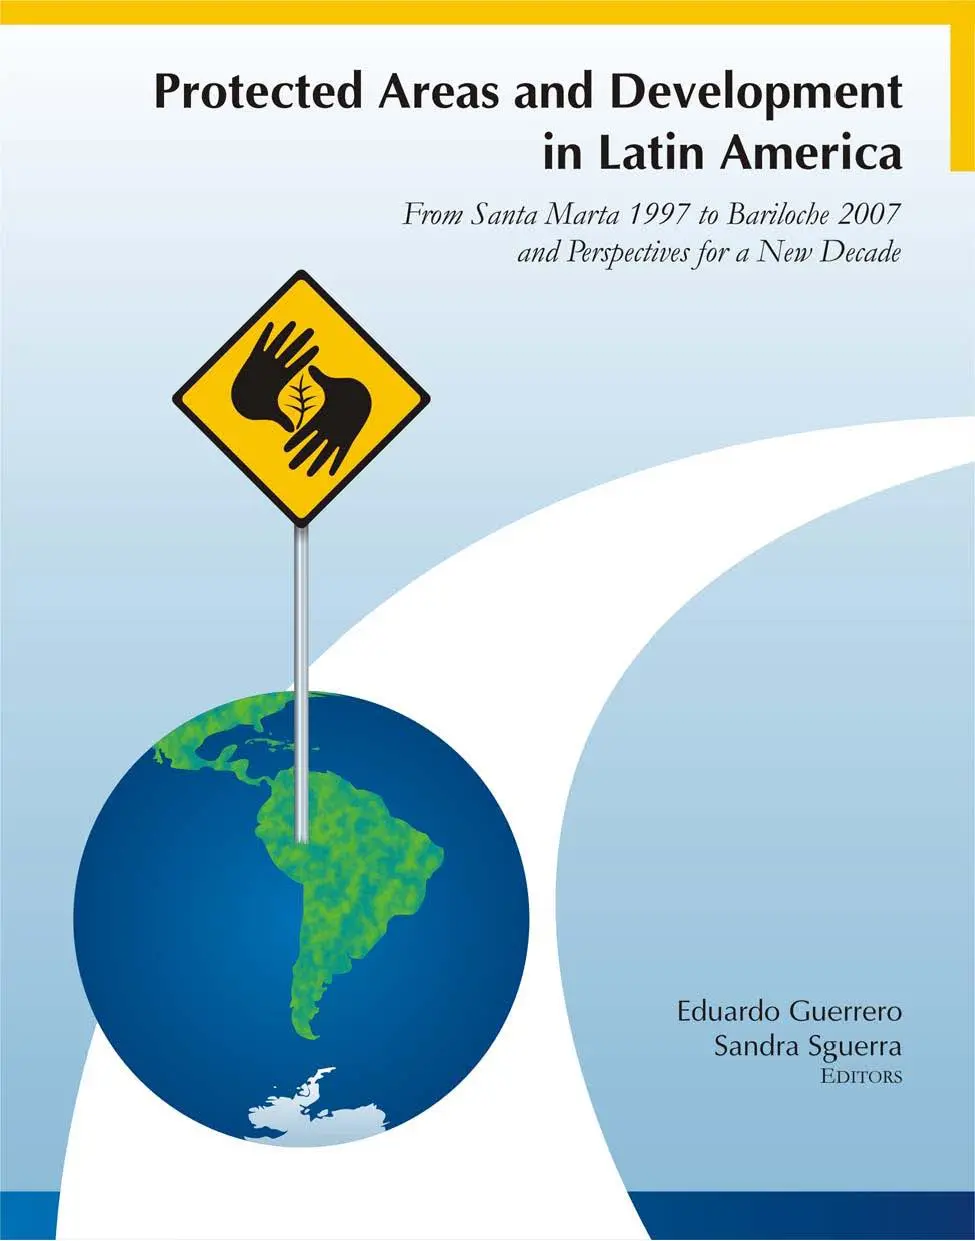 Protected Areas and Development in Latin America
From Santa Marta 1997 to Bariloche 2007 and Perspectives for a New Decade